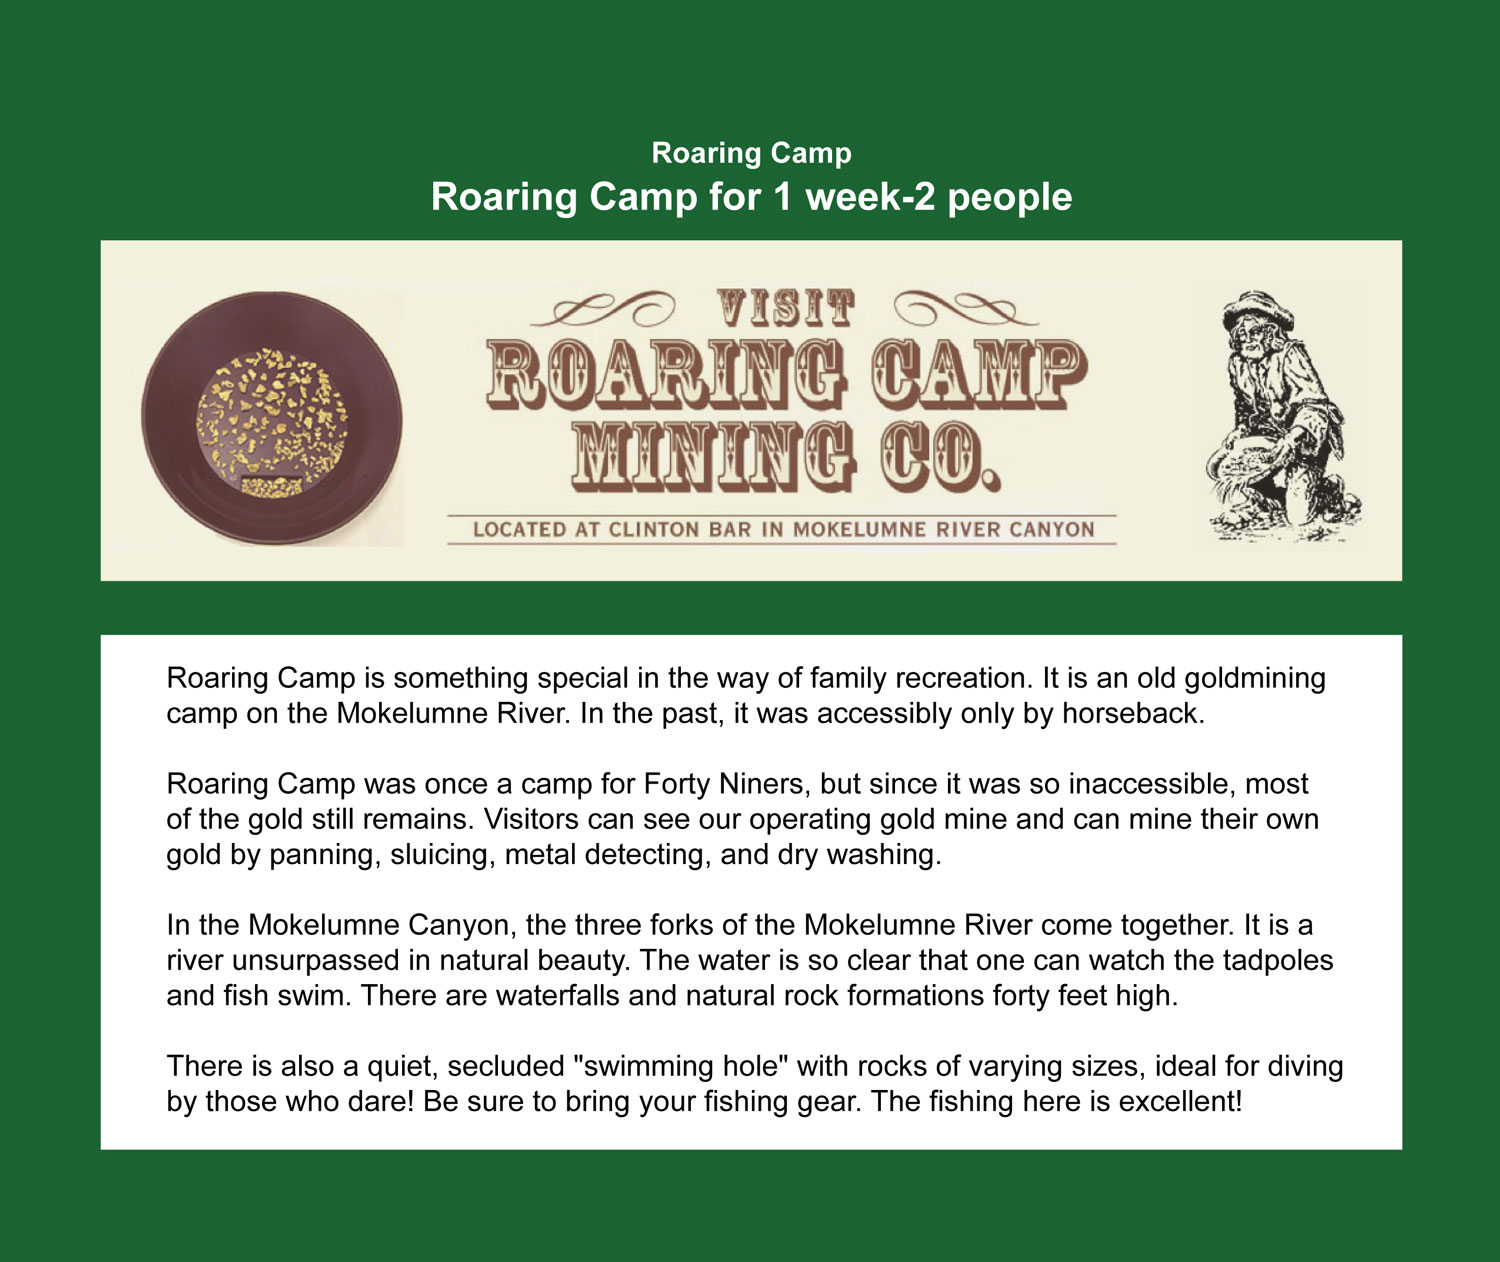 Two people for a full week at Roaring Camp